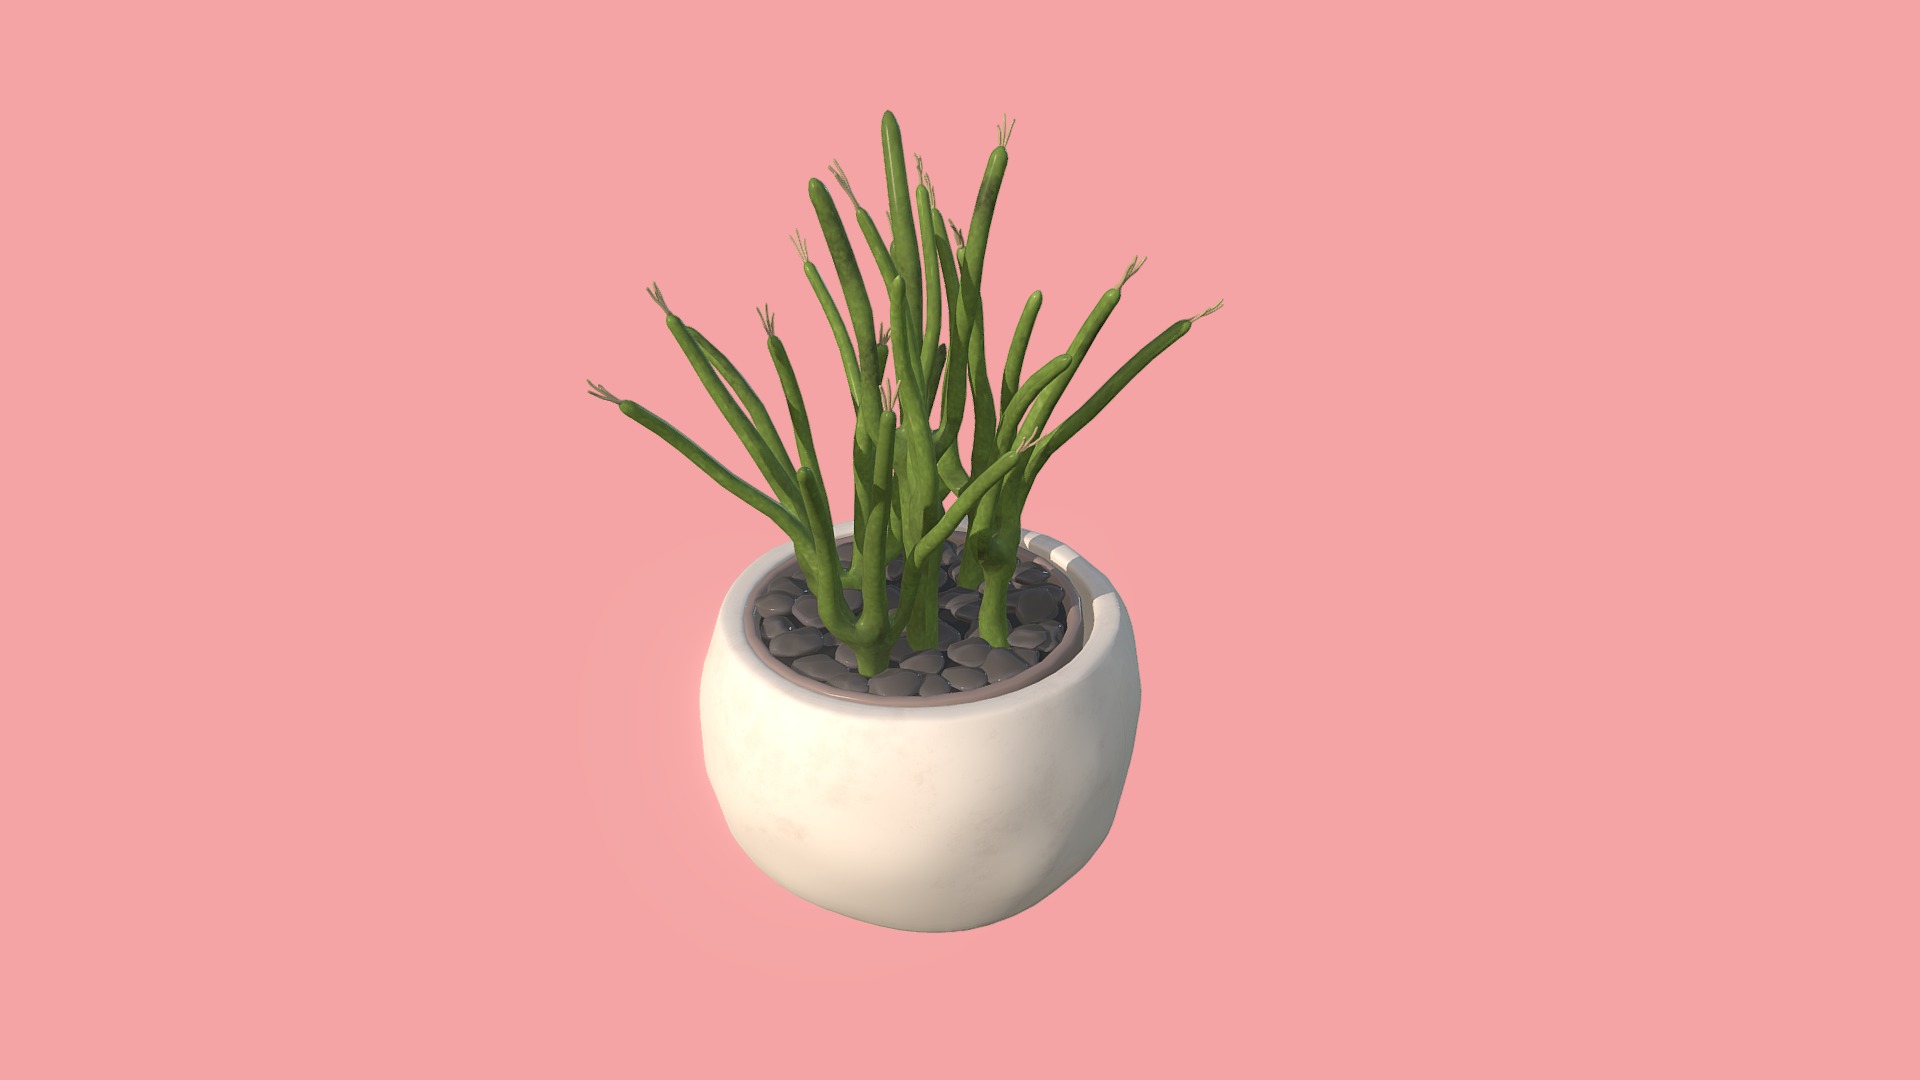 3D model Cactus Snake - This is a 3D model of the Cactus Snake. The 3D model is about a potted plant on a pink background.